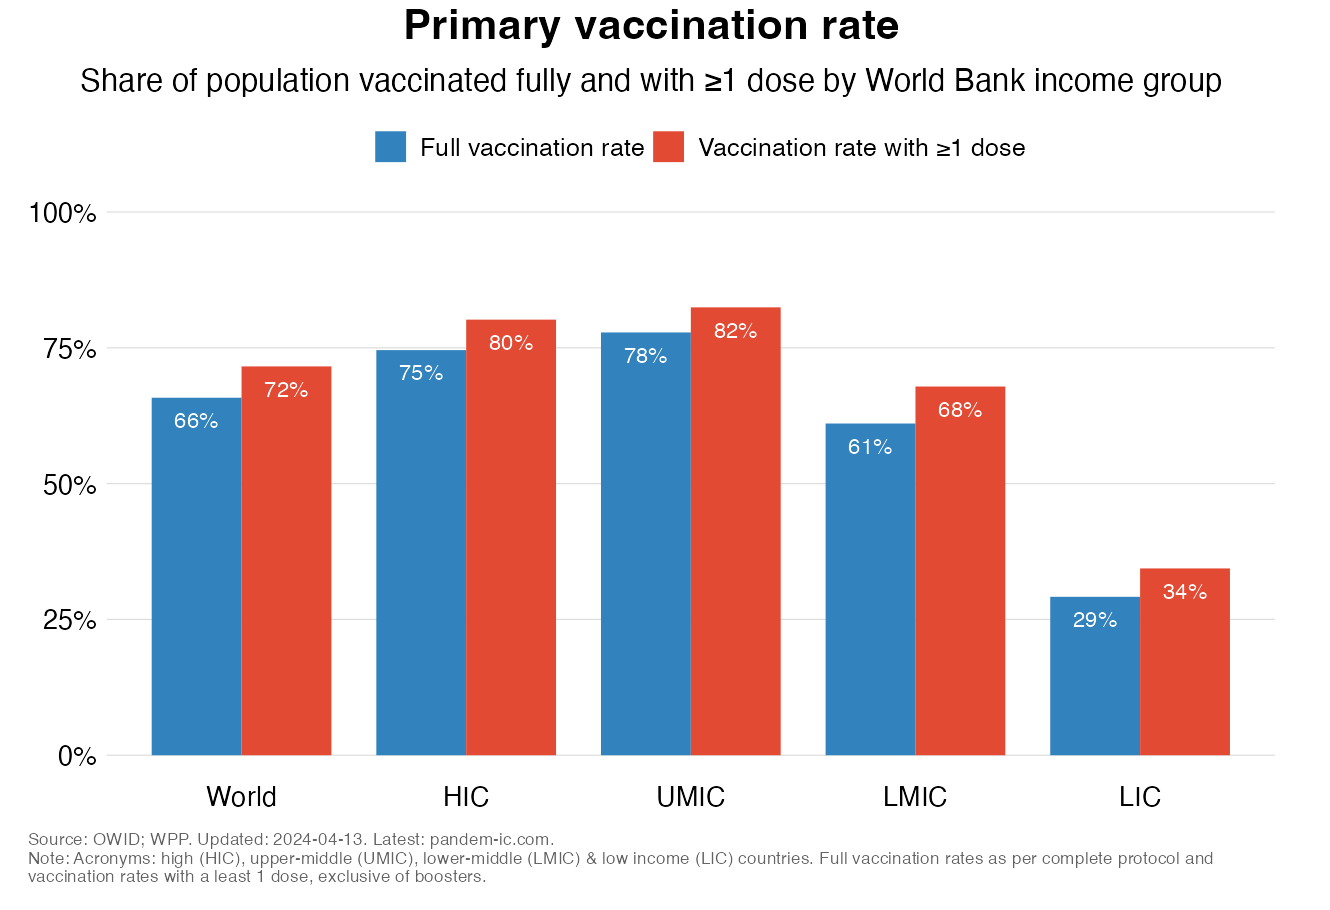 Primary vaccination rate by income